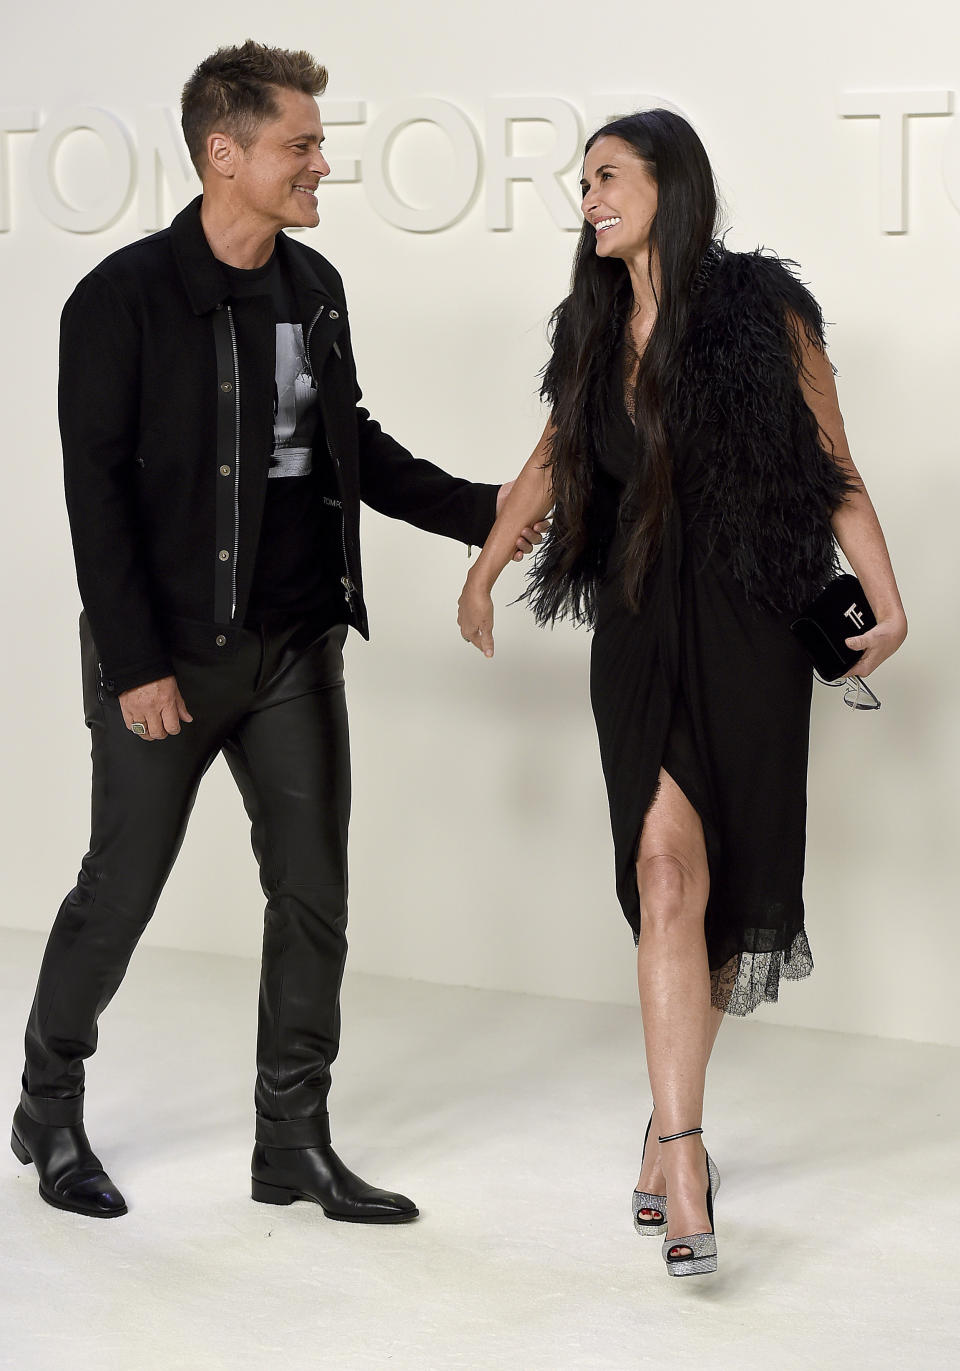 Rob Lowe and Demi Moore attend the Tom Ford show at Milk Studios during NYFW Fall/Winter 2020 on Friday, Feb. 7, 2020, in Los Angeles. (Photo by Jordan Strauss/Invision/AP)